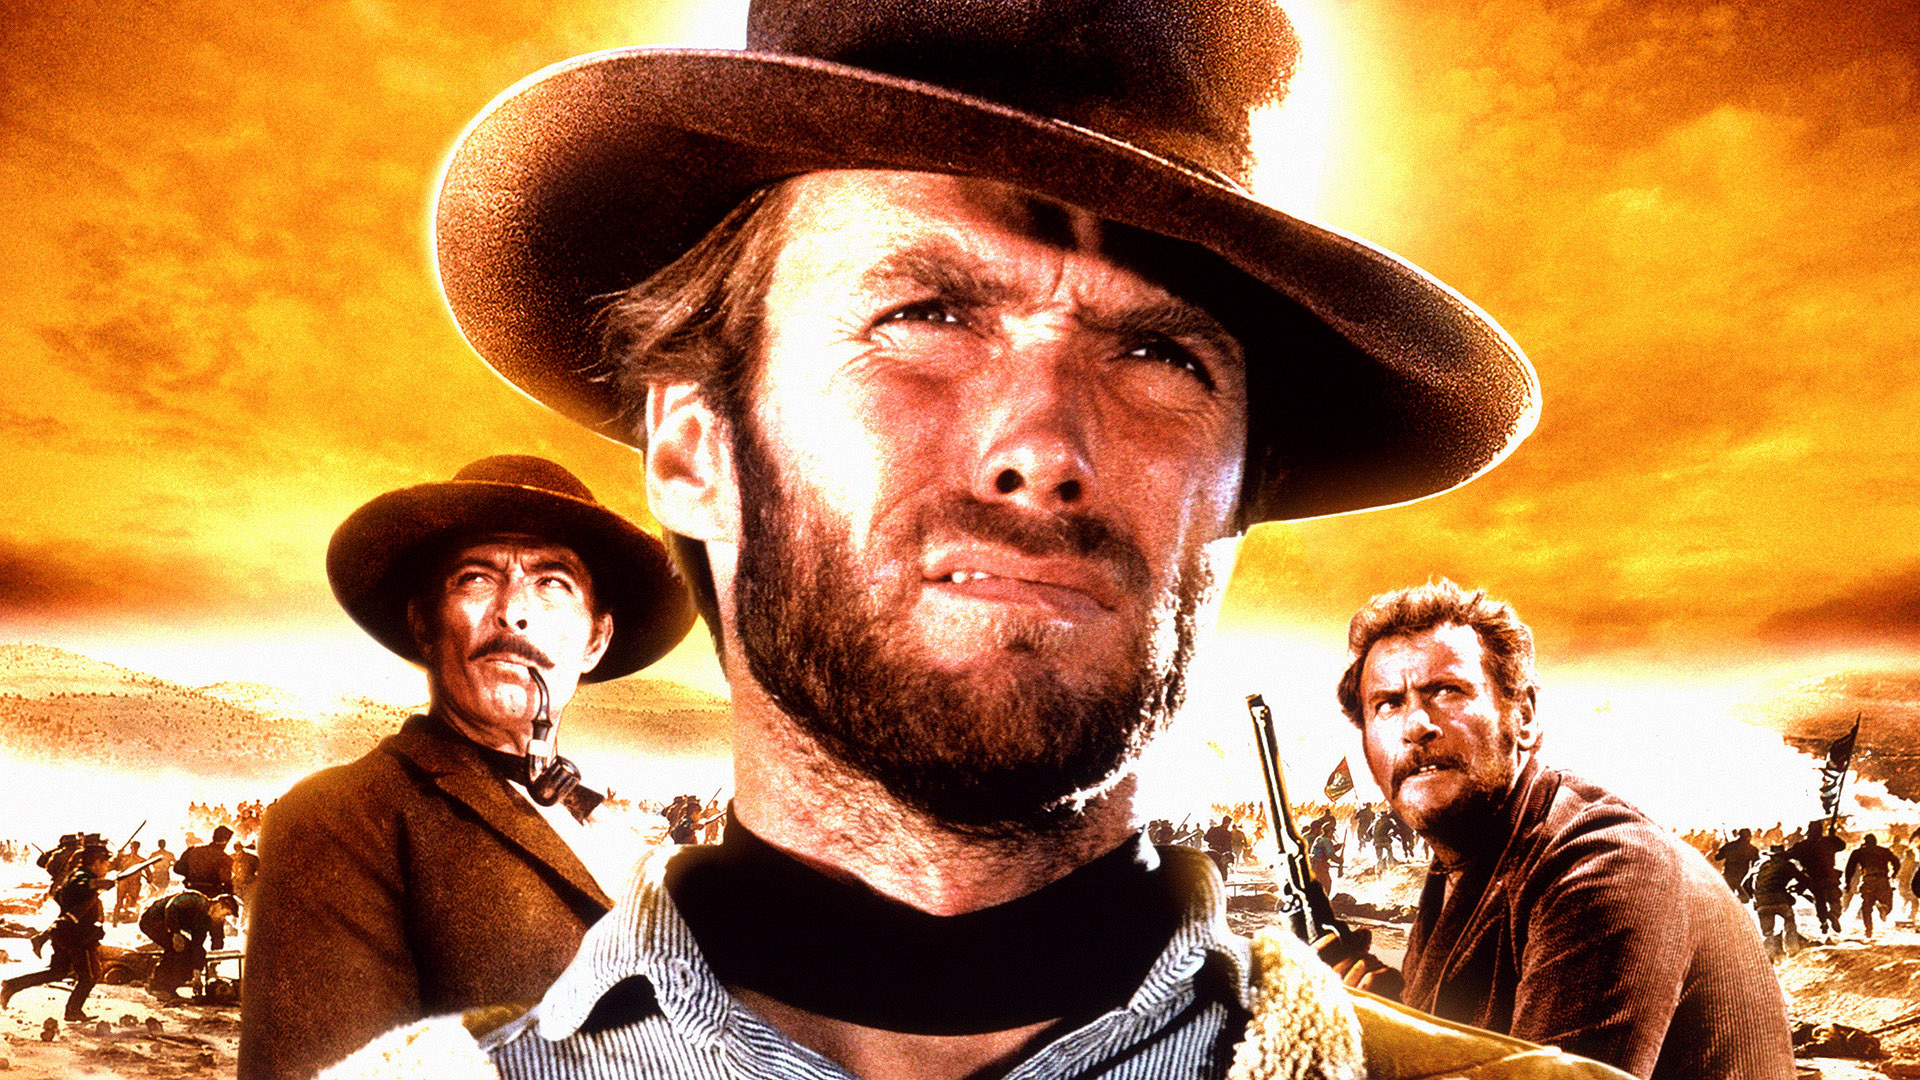 The Good, The Bad And The Ugly, Clint Eastwood, Western movie icon, Timeless charm, 1920x1080 Full HD Desktop